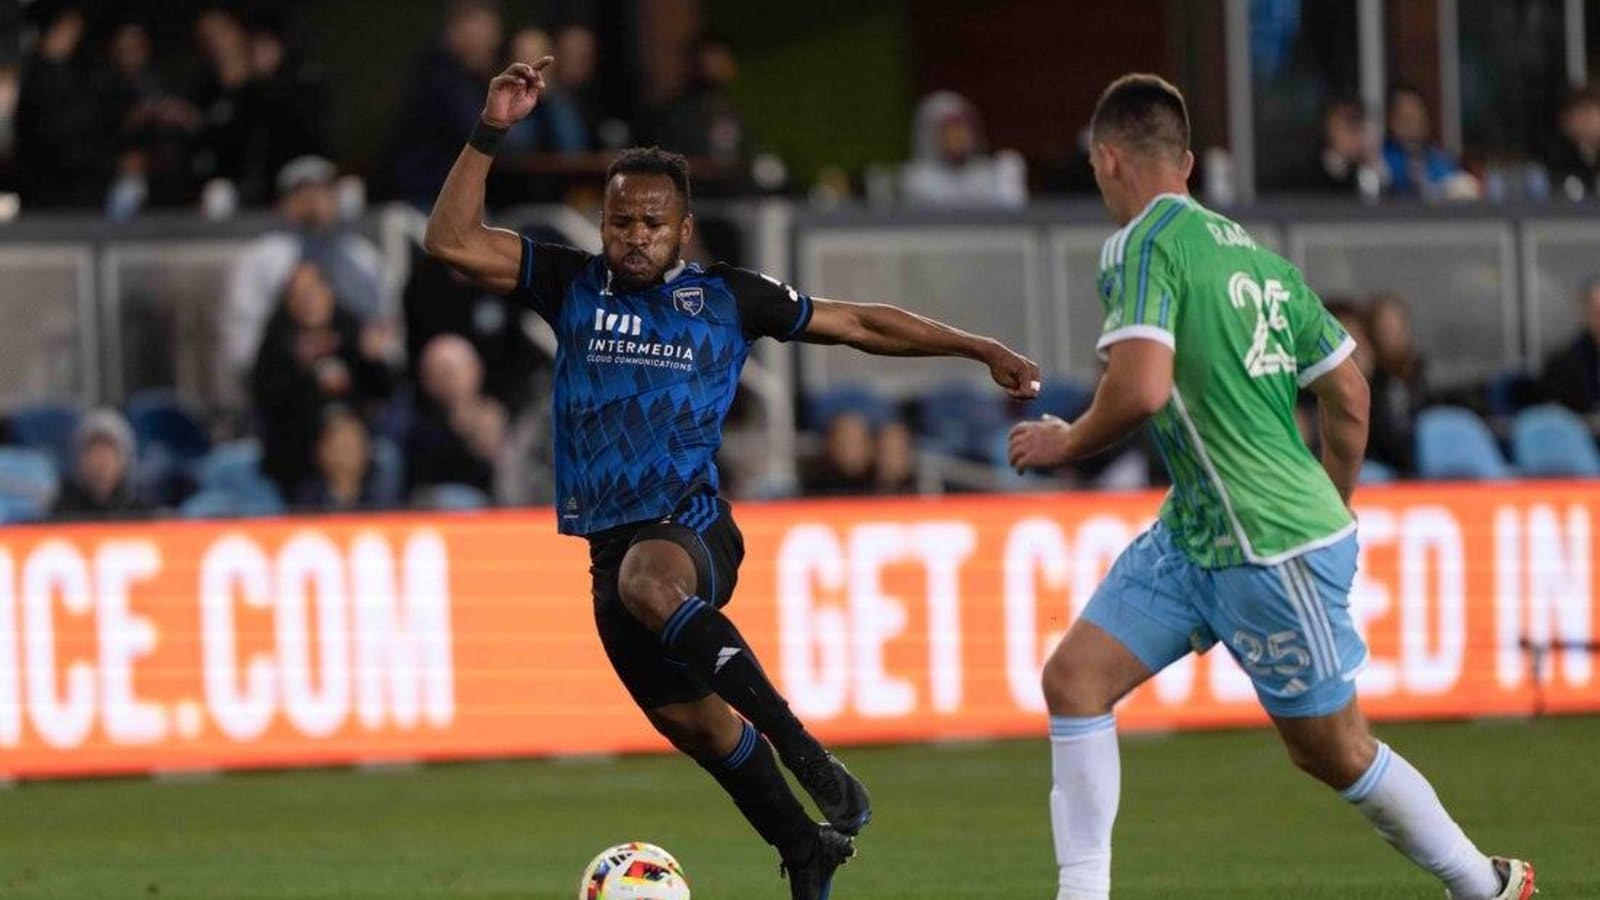 Fresh off first win, Earthquakes visit Dynamo